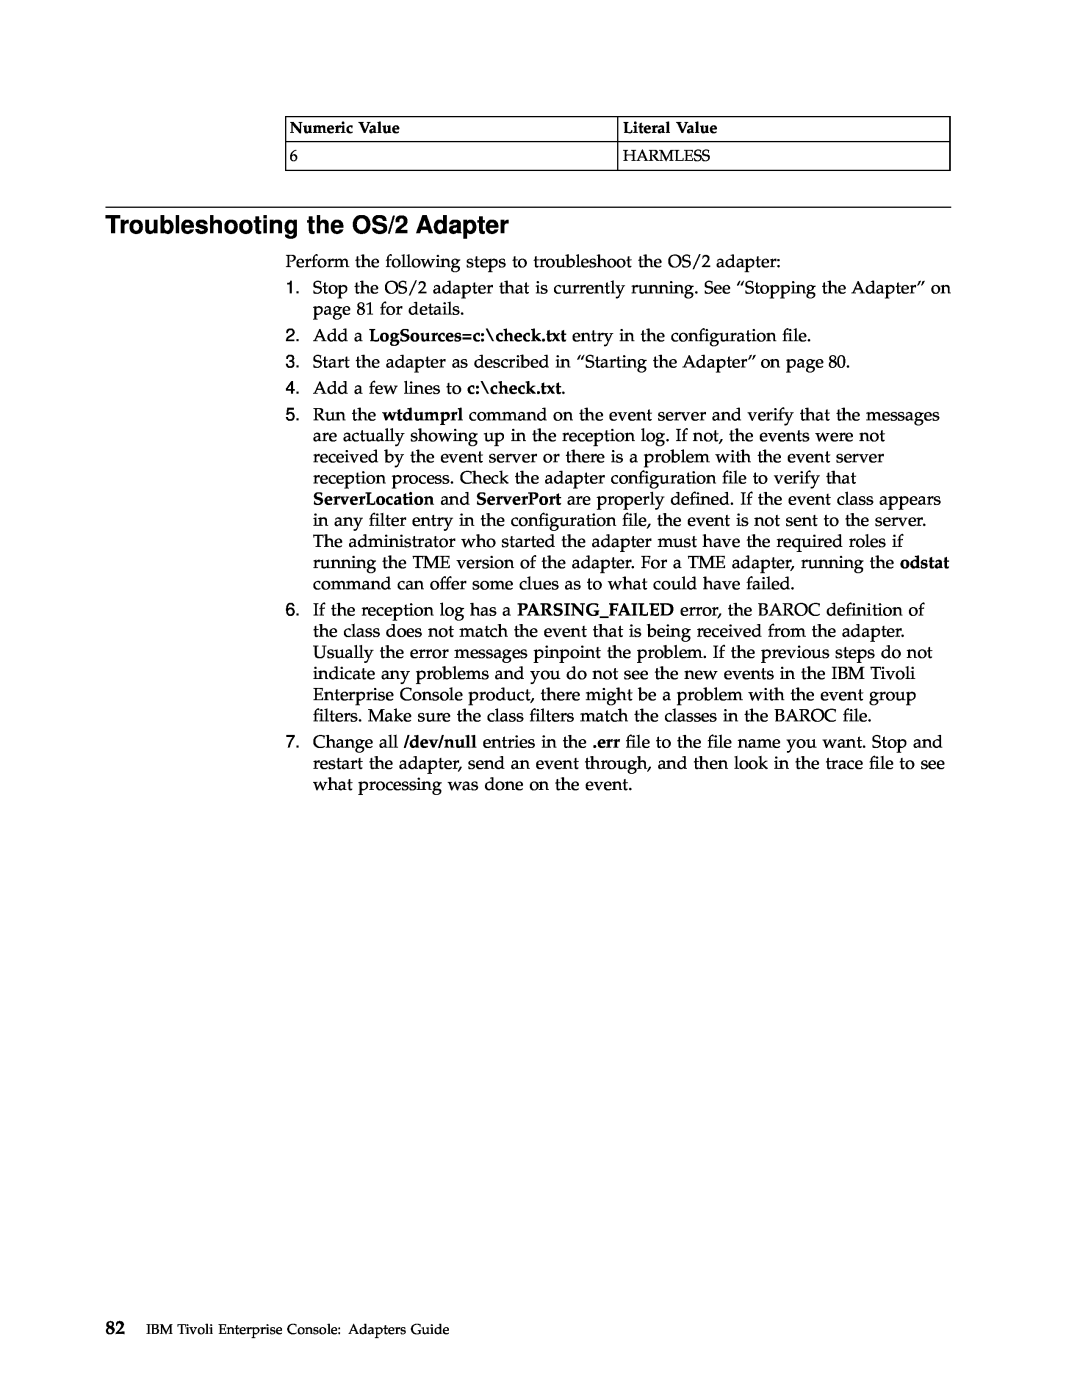 IBM Enterprise Console manual Troubleshooting the OS/2 Adapter 